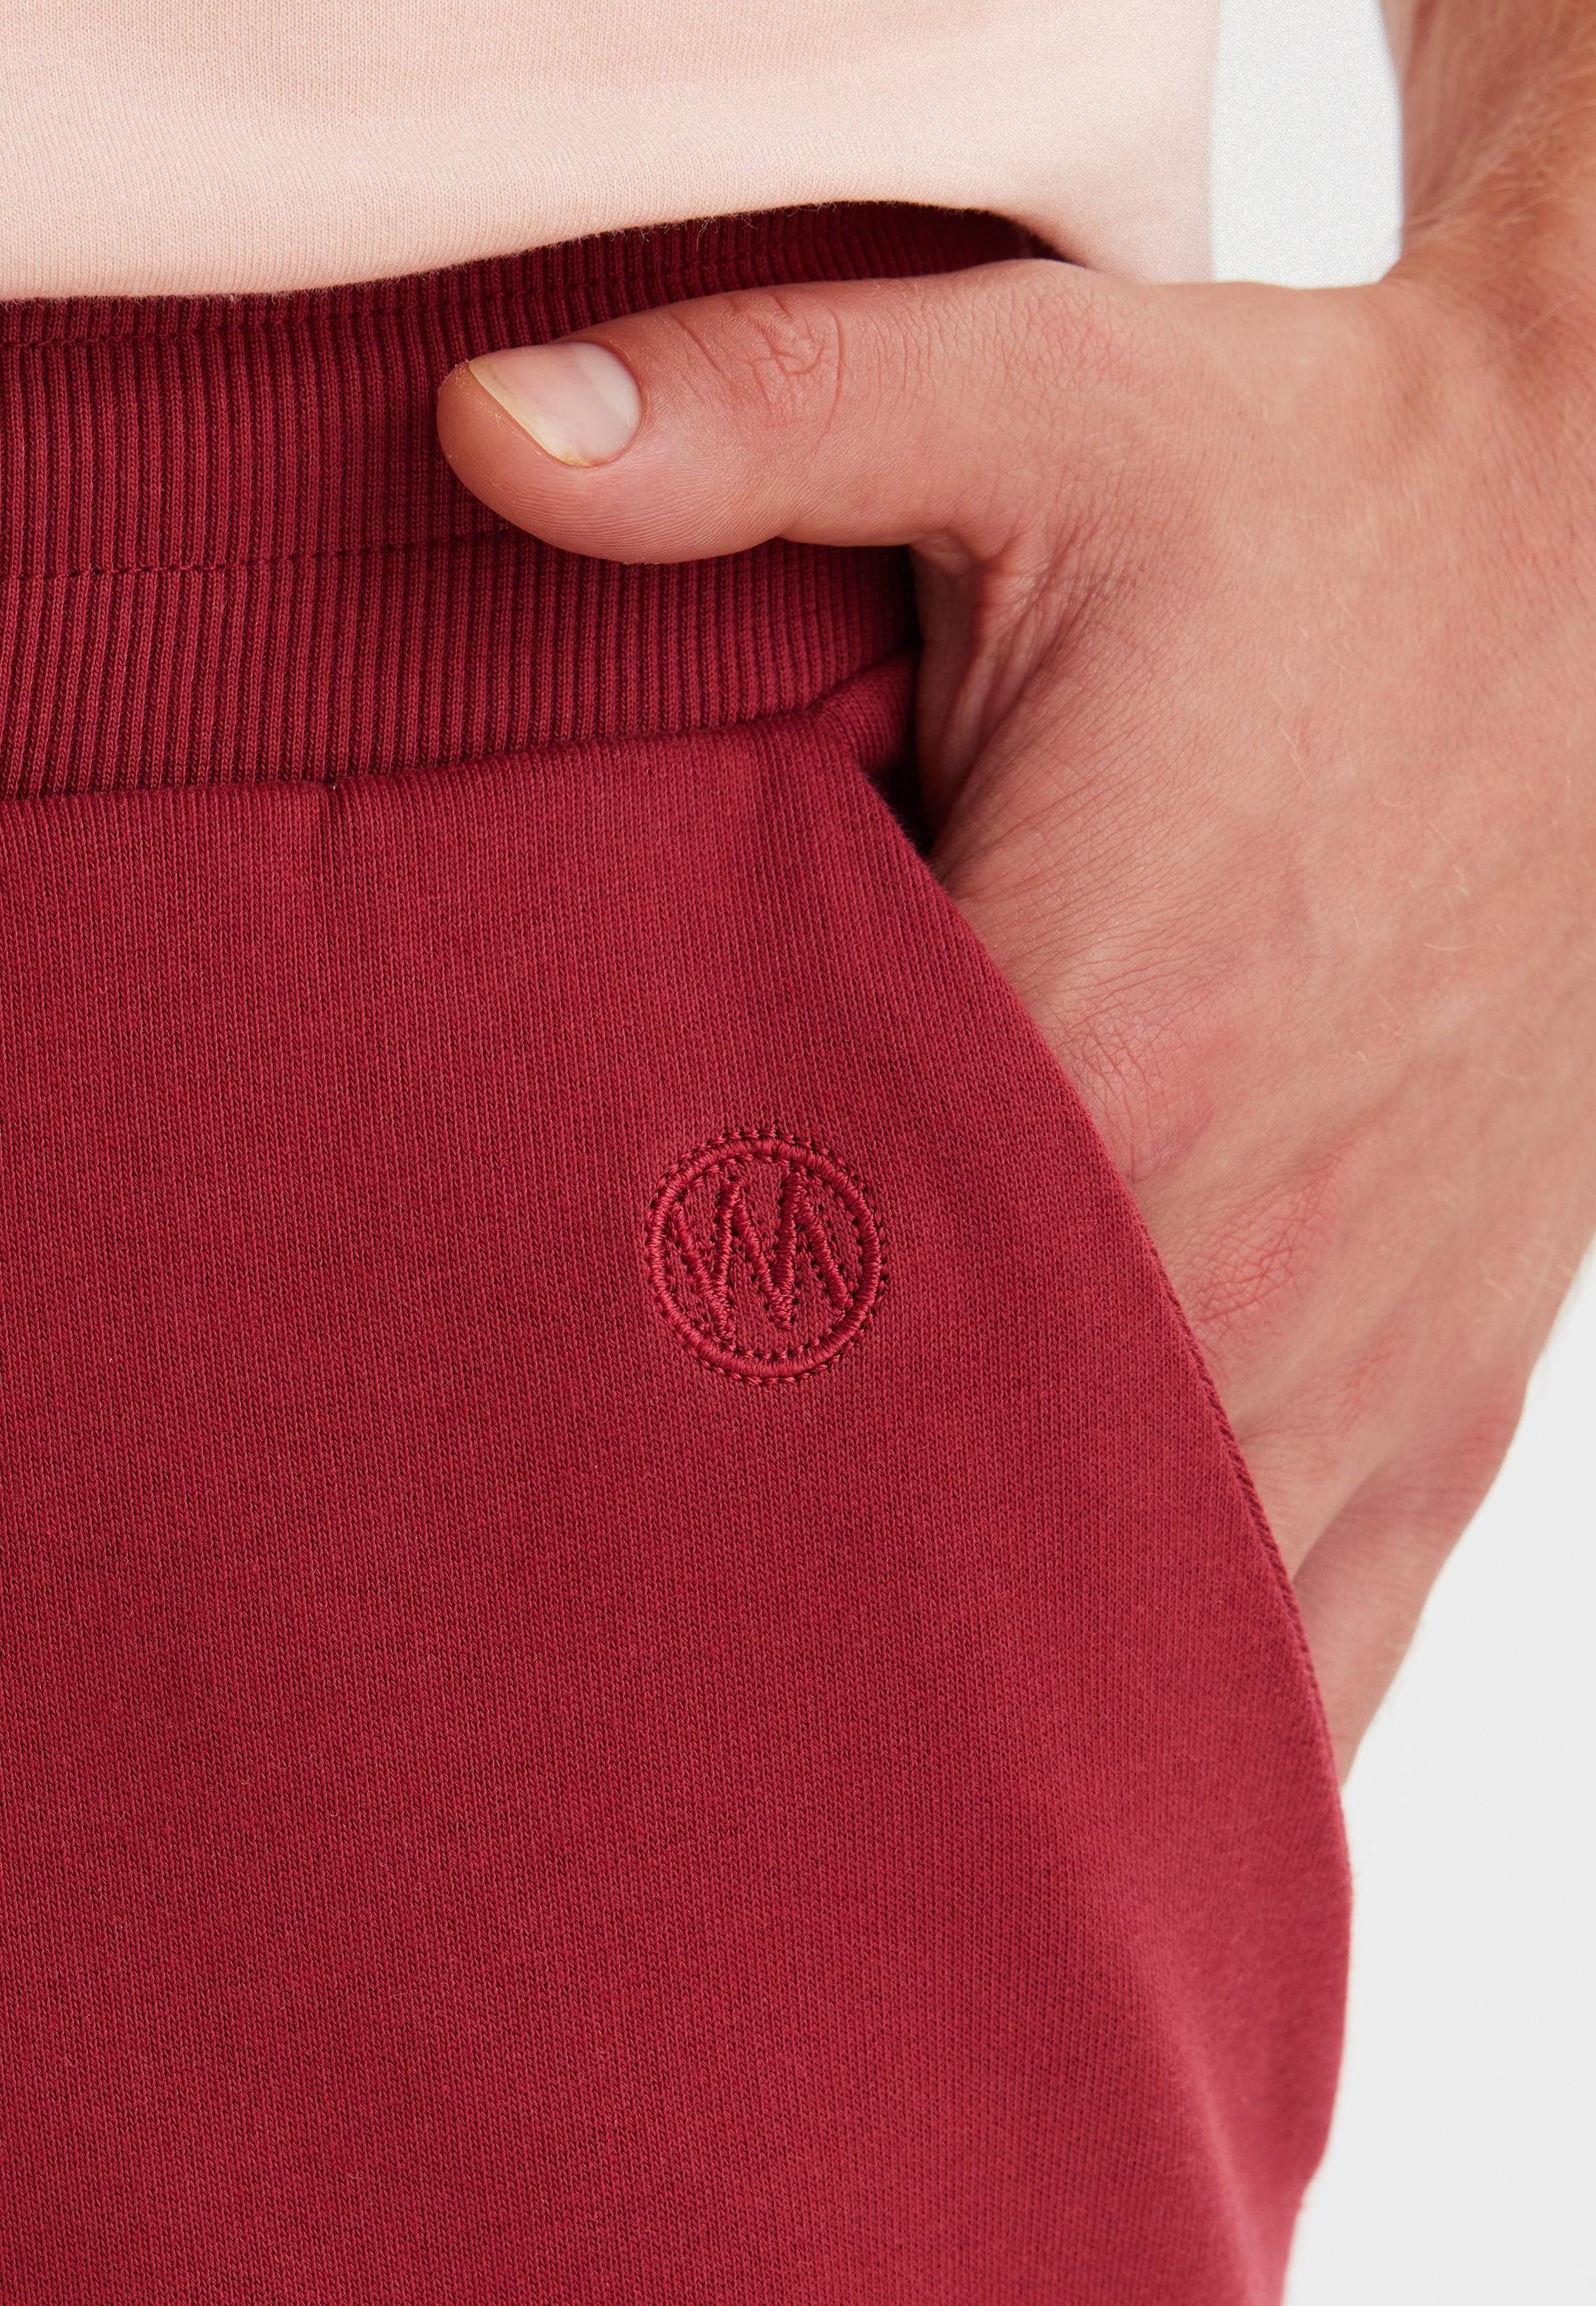 CORE SWEATPANTS in Mineral Red